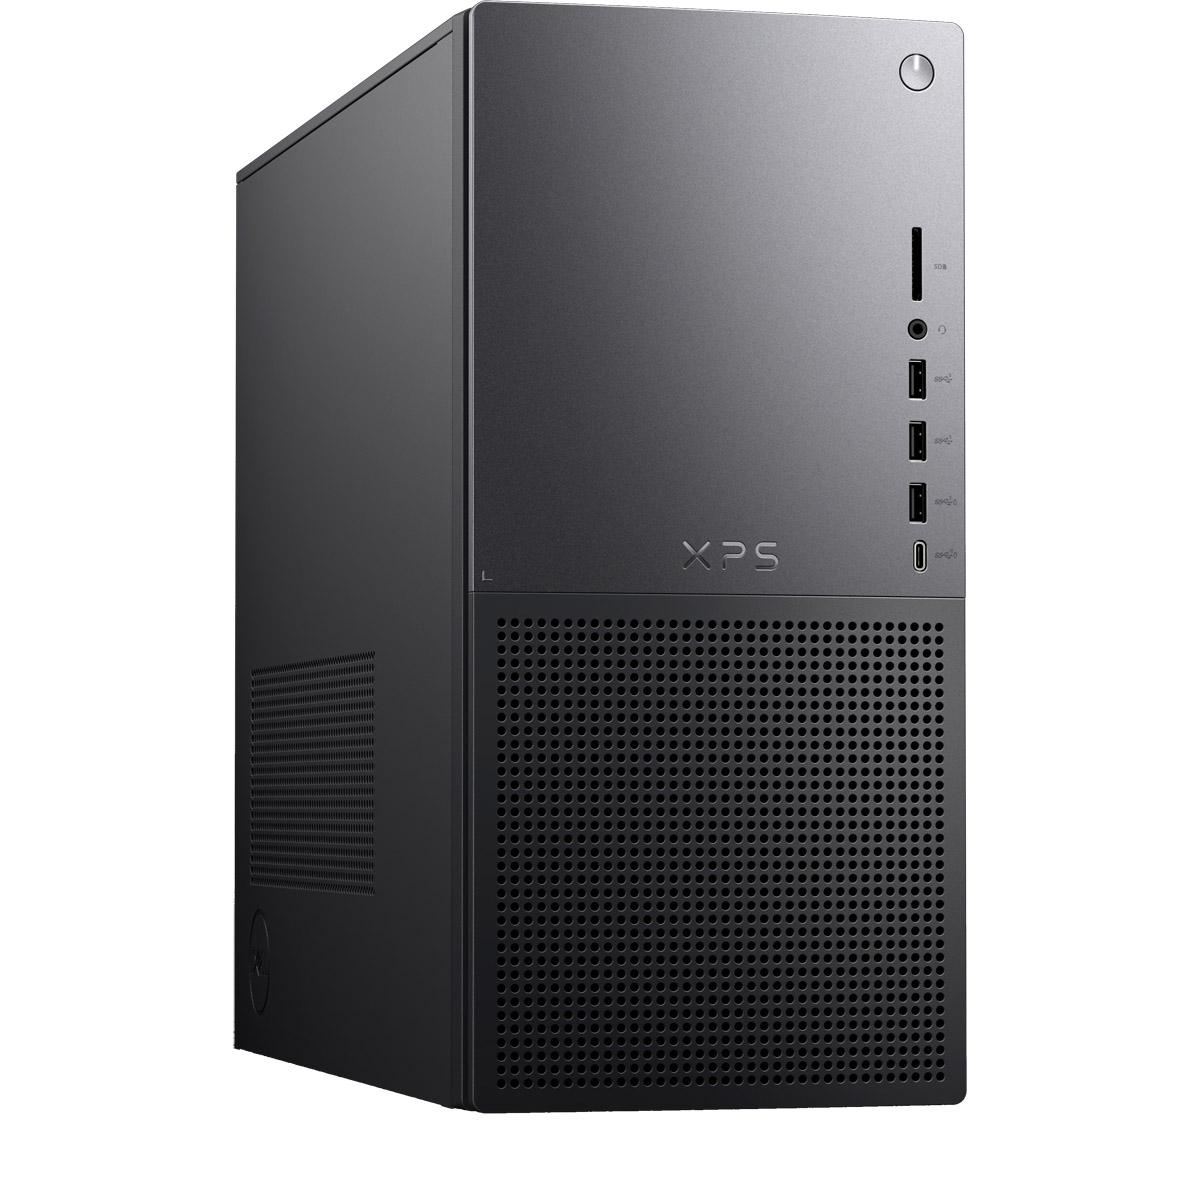 Dell XPS 8960 i7 8GB RX6700 512GB Desktop Computer for $1017.23 Shipped